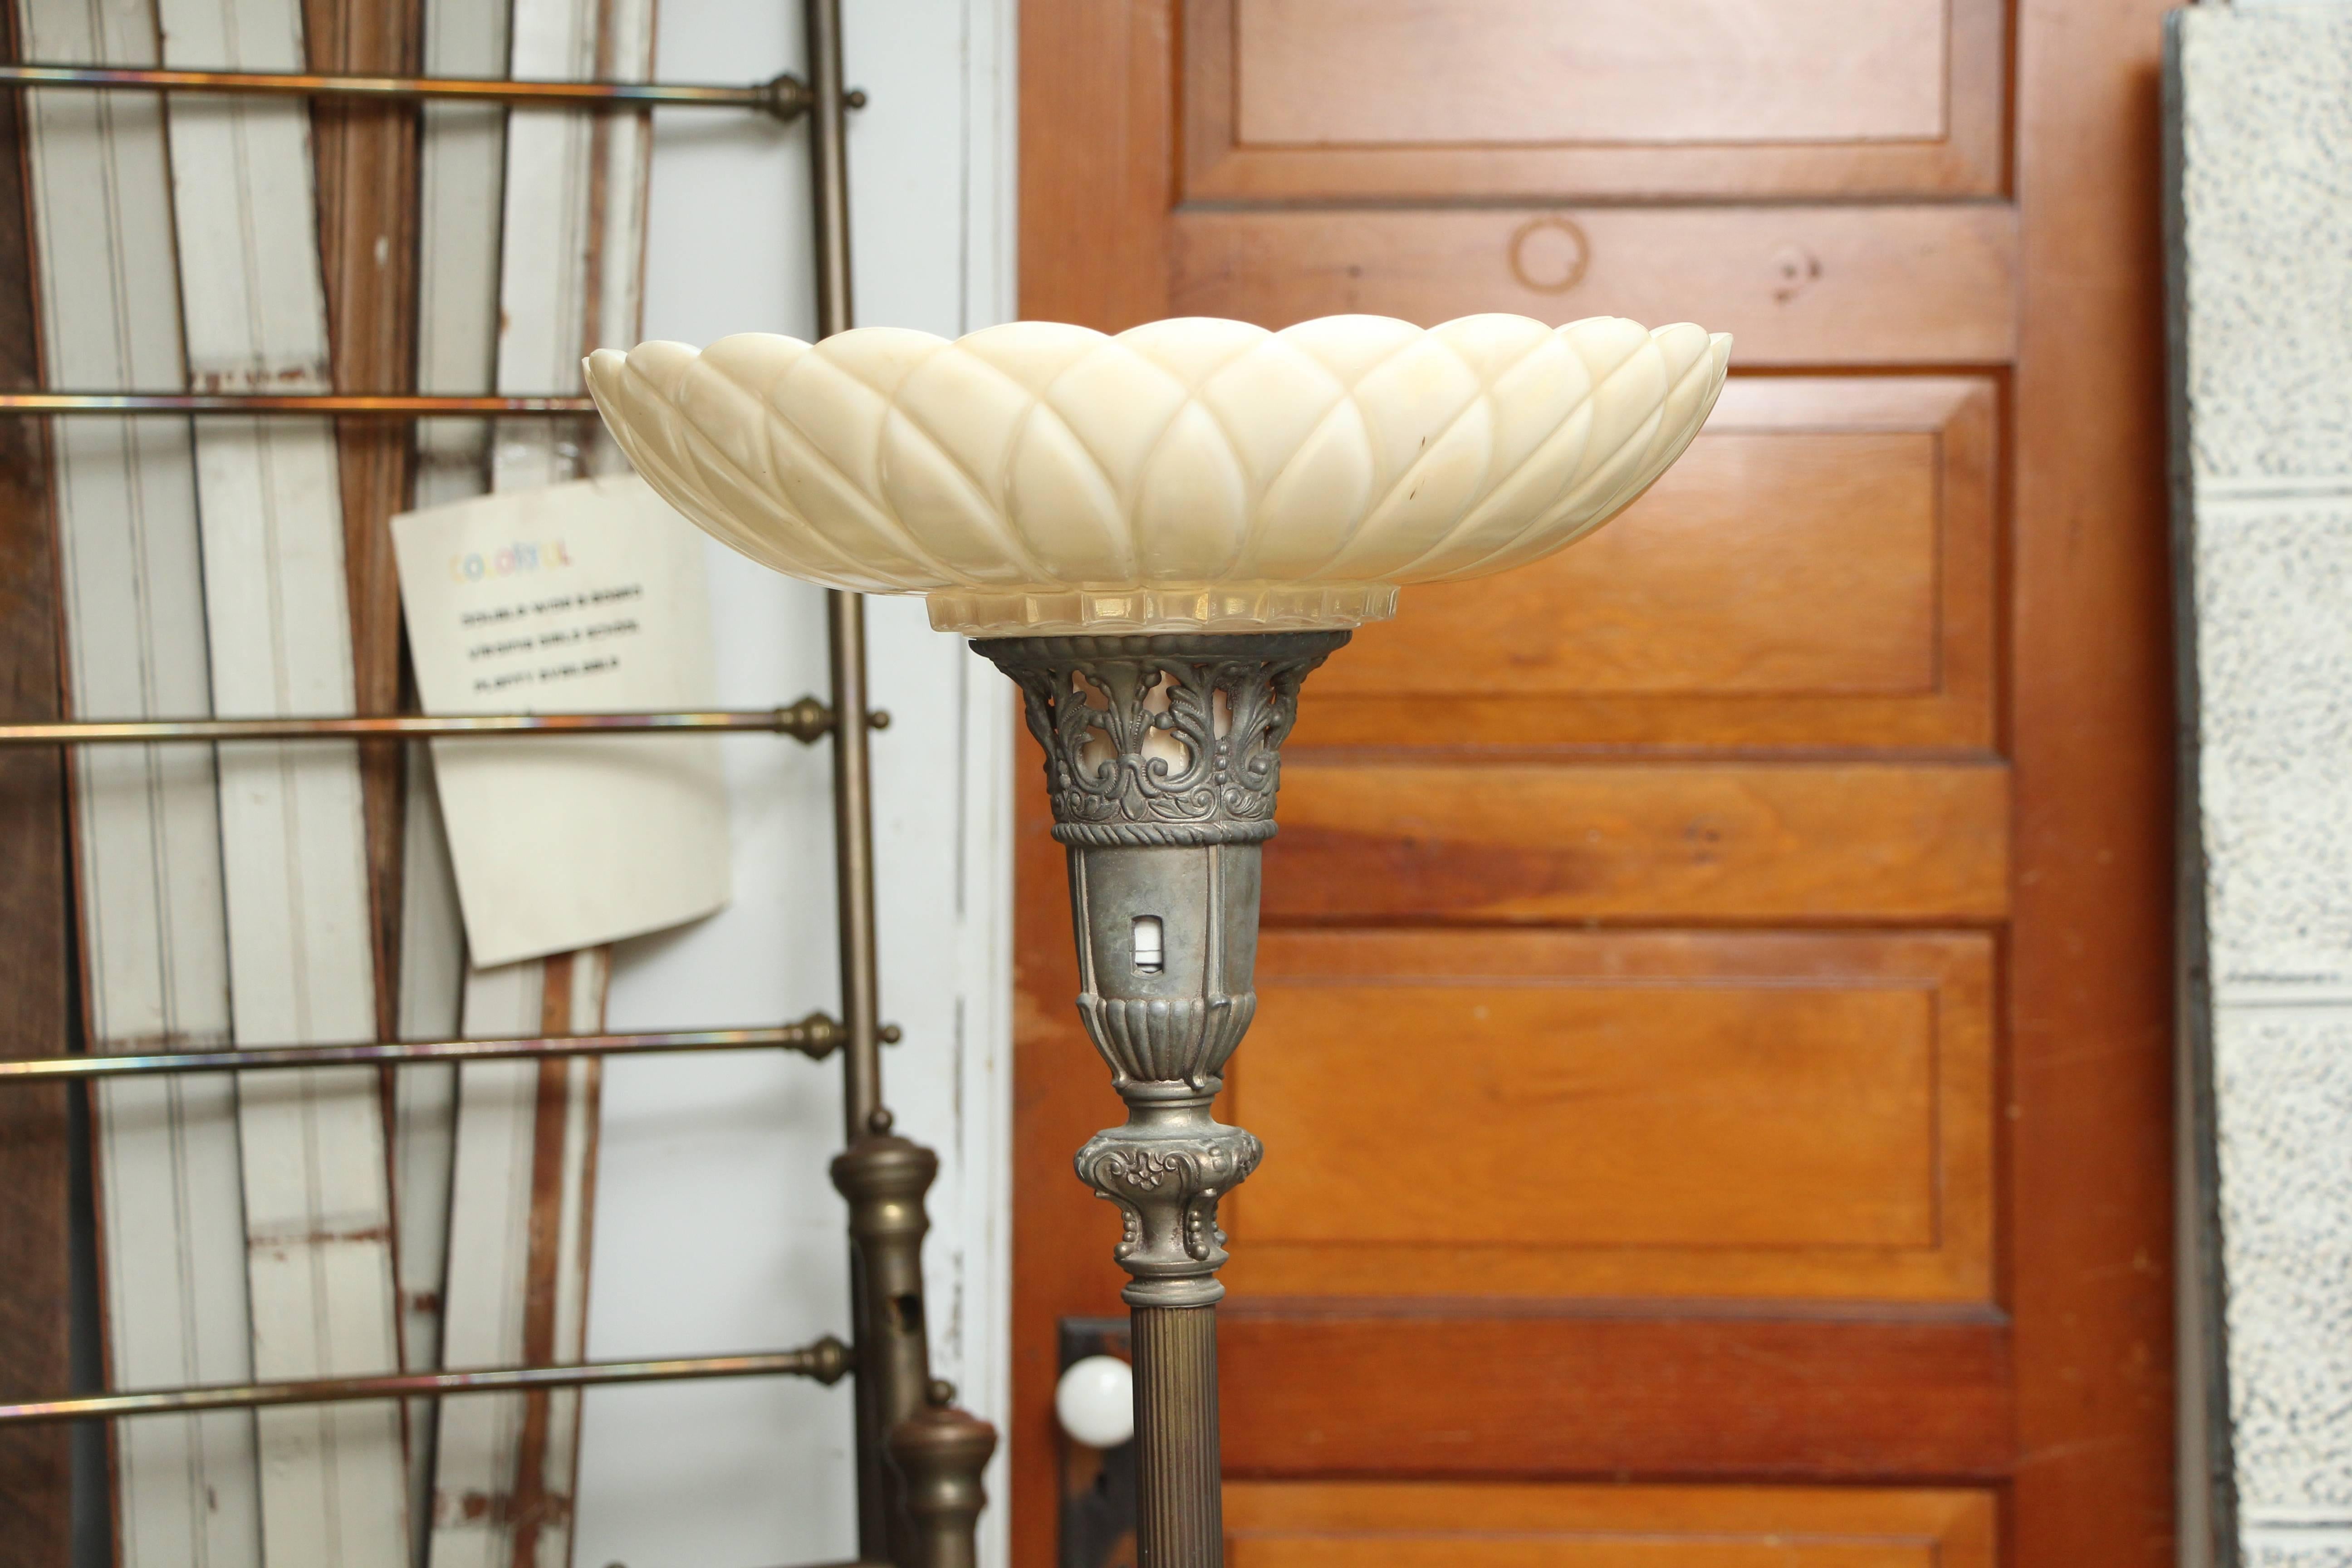 1930s Art Nouveau torchiere floor lamp with marble base. Molded glass upward shade throws a soft light on this torchiere lamp. Cast metal top and base have a flowing Art Nouveau detail. Fluted center column ends in a marble base. This item can be